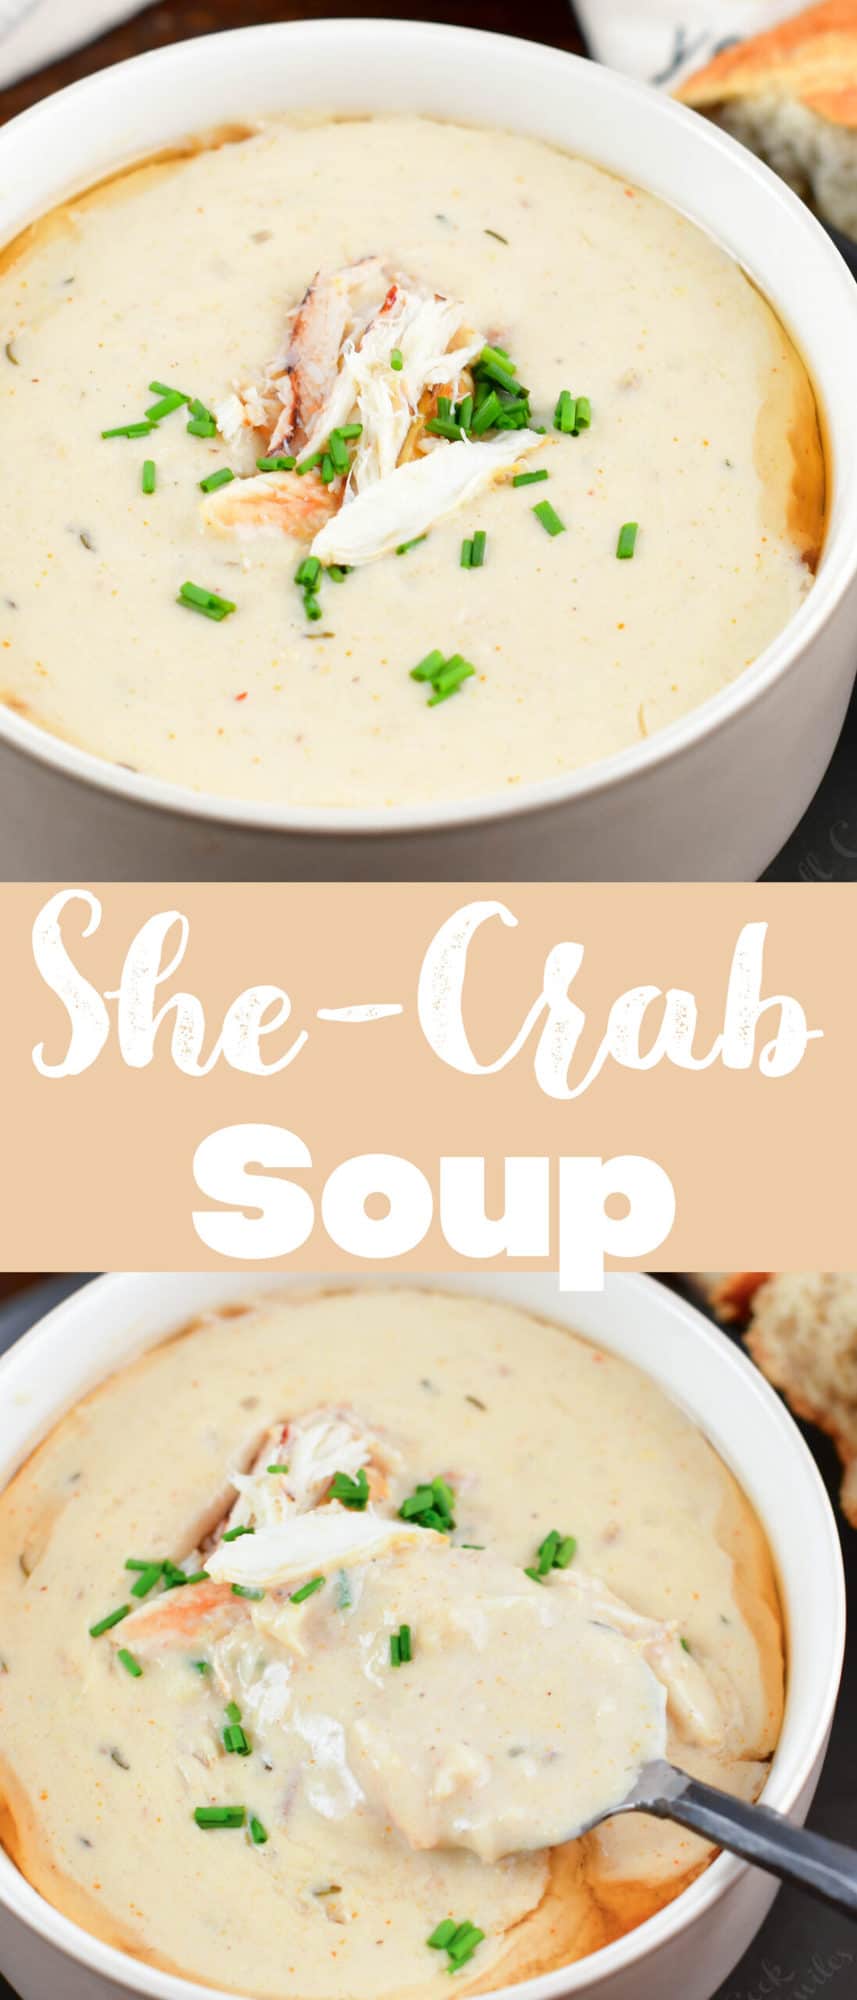 collage of crab soup images and title in the middle